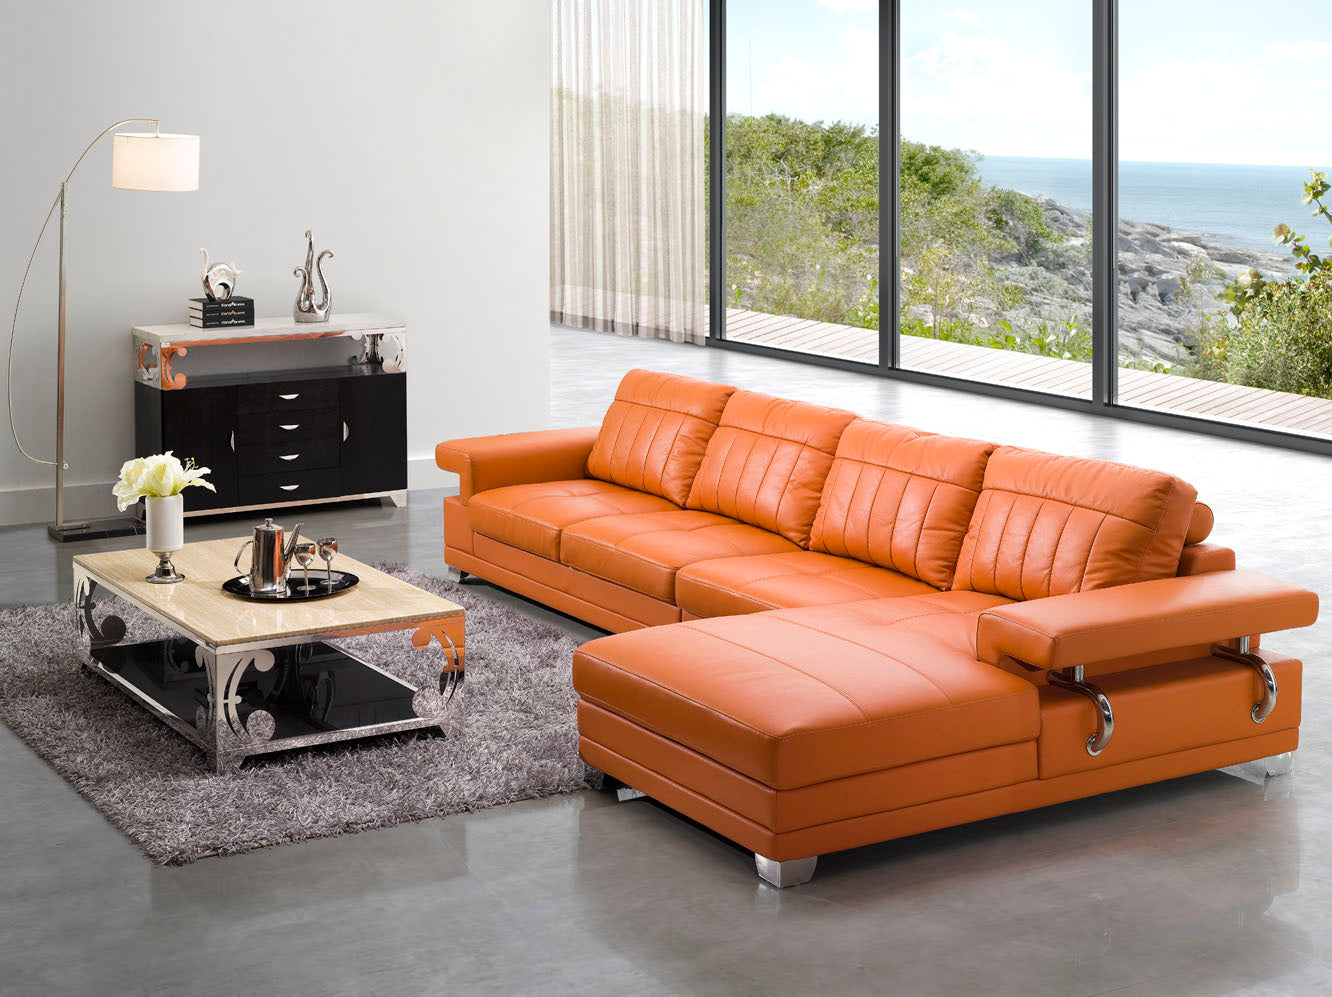 How To Maintain PU Leather Furniture?